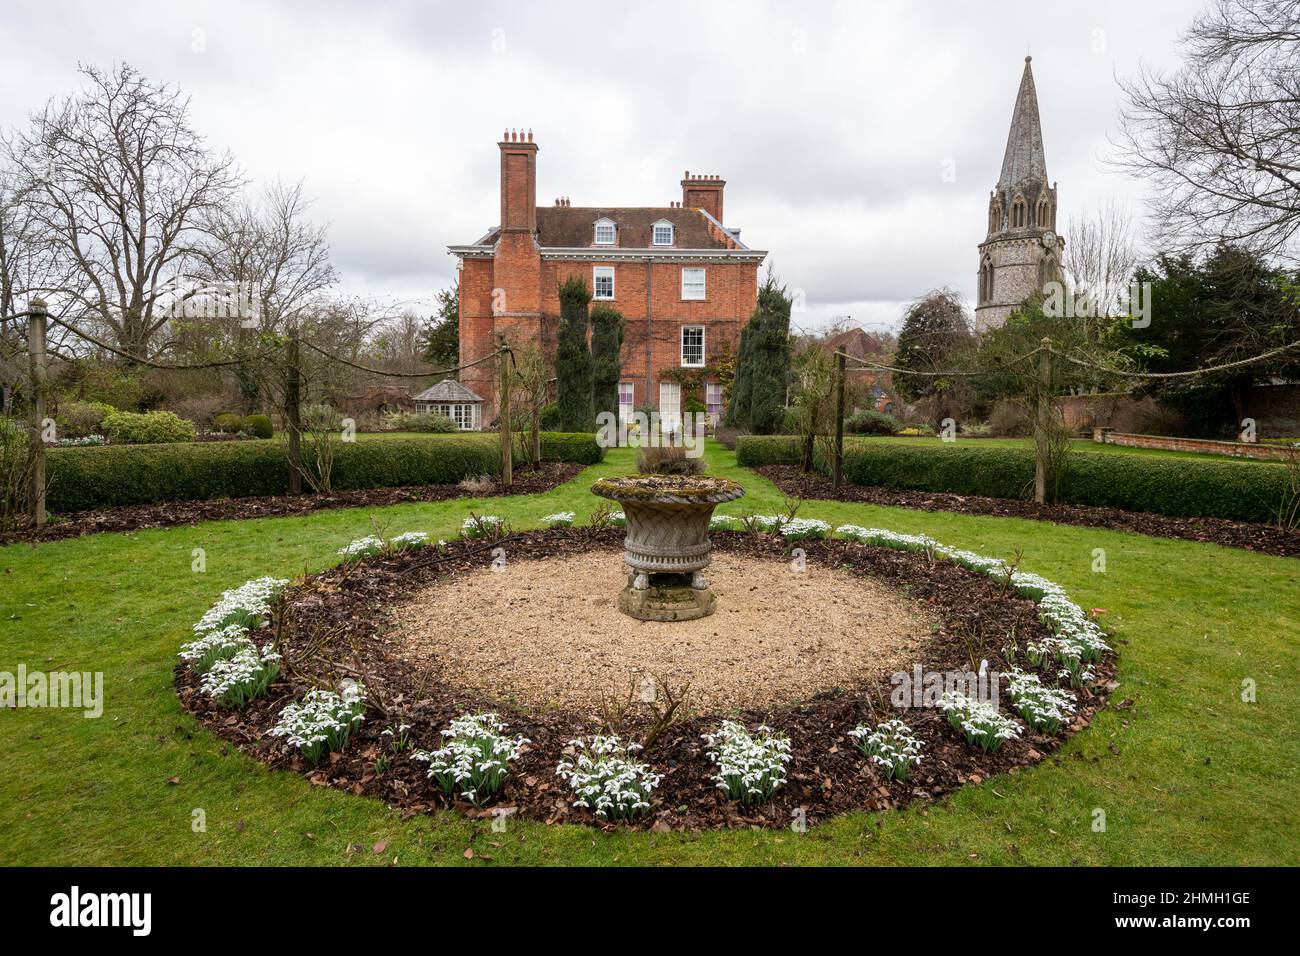 Welford Park garden and house with snowdrops, a popular visitor attraction during February in West Berkshire, England, UK Stock Photo